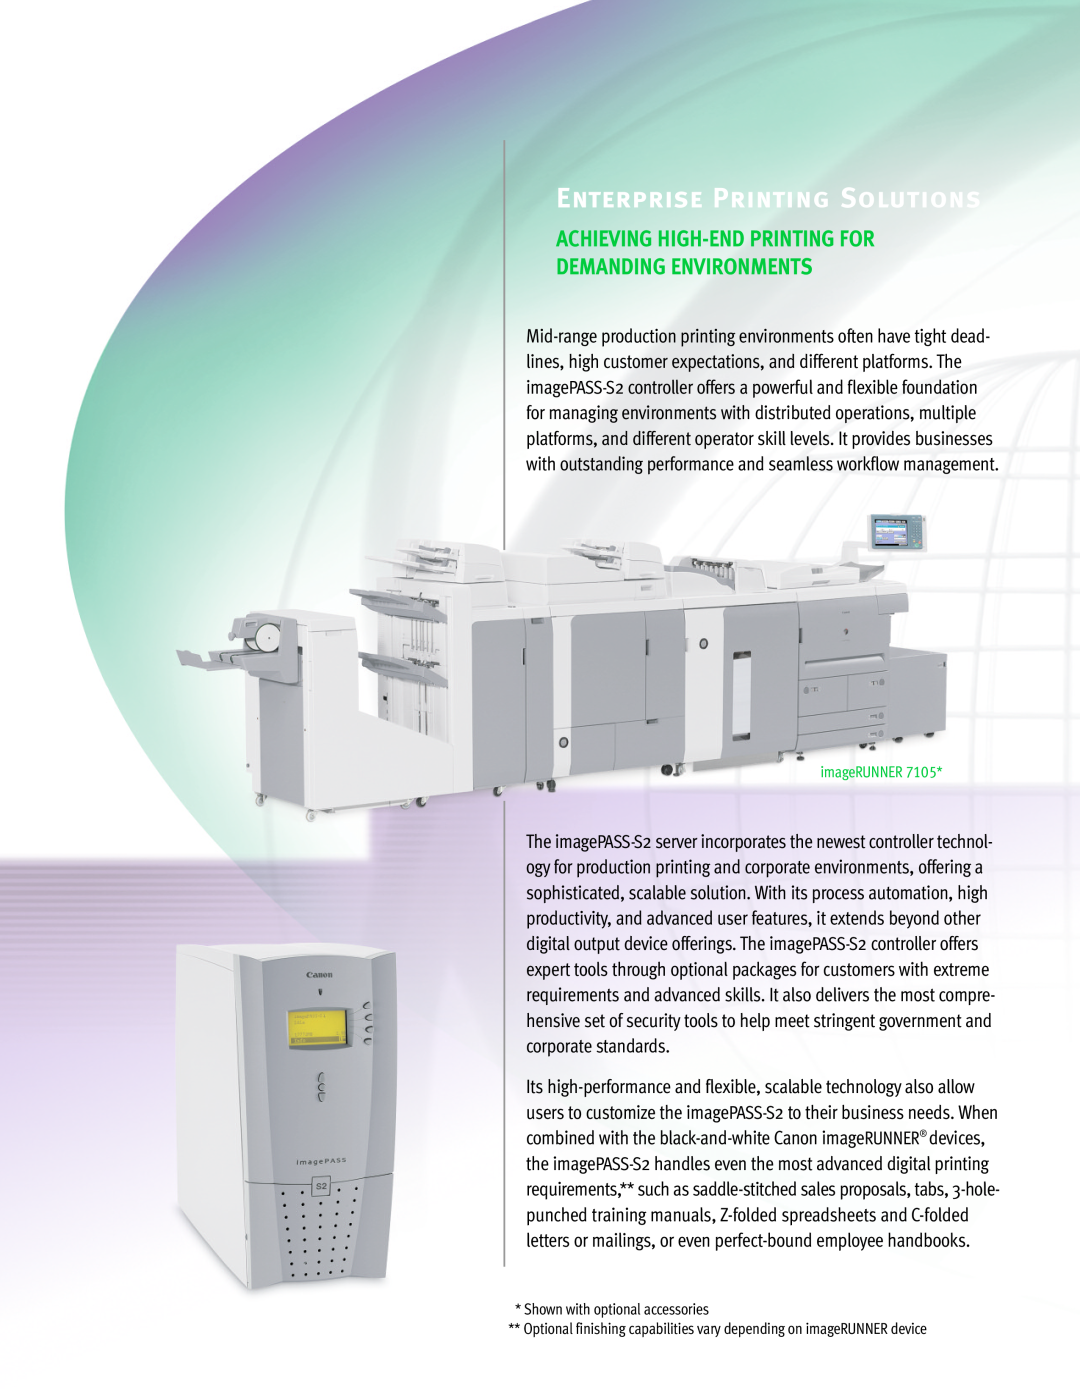 Canon IMAGEPASS-S2 Enterprise Printing Solutions, Achieving High-End Printing For Demanding Environments, imageRUNNER 